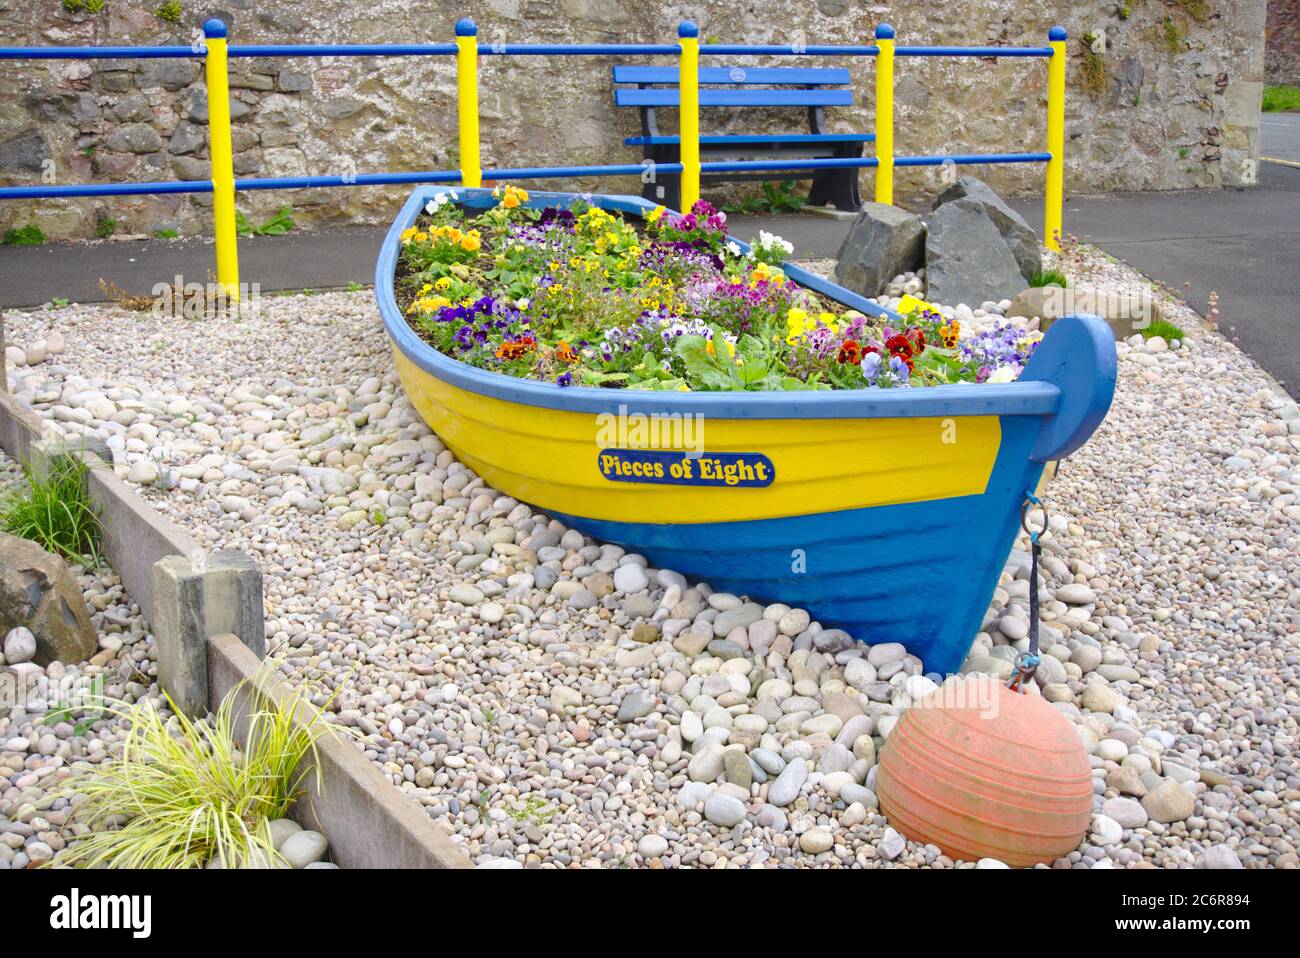 Pieces Of Eight art installation in Coldingham, Berwickshire, Scottish Borders, UK, with flowers arranged in a small boat. Stock Photo